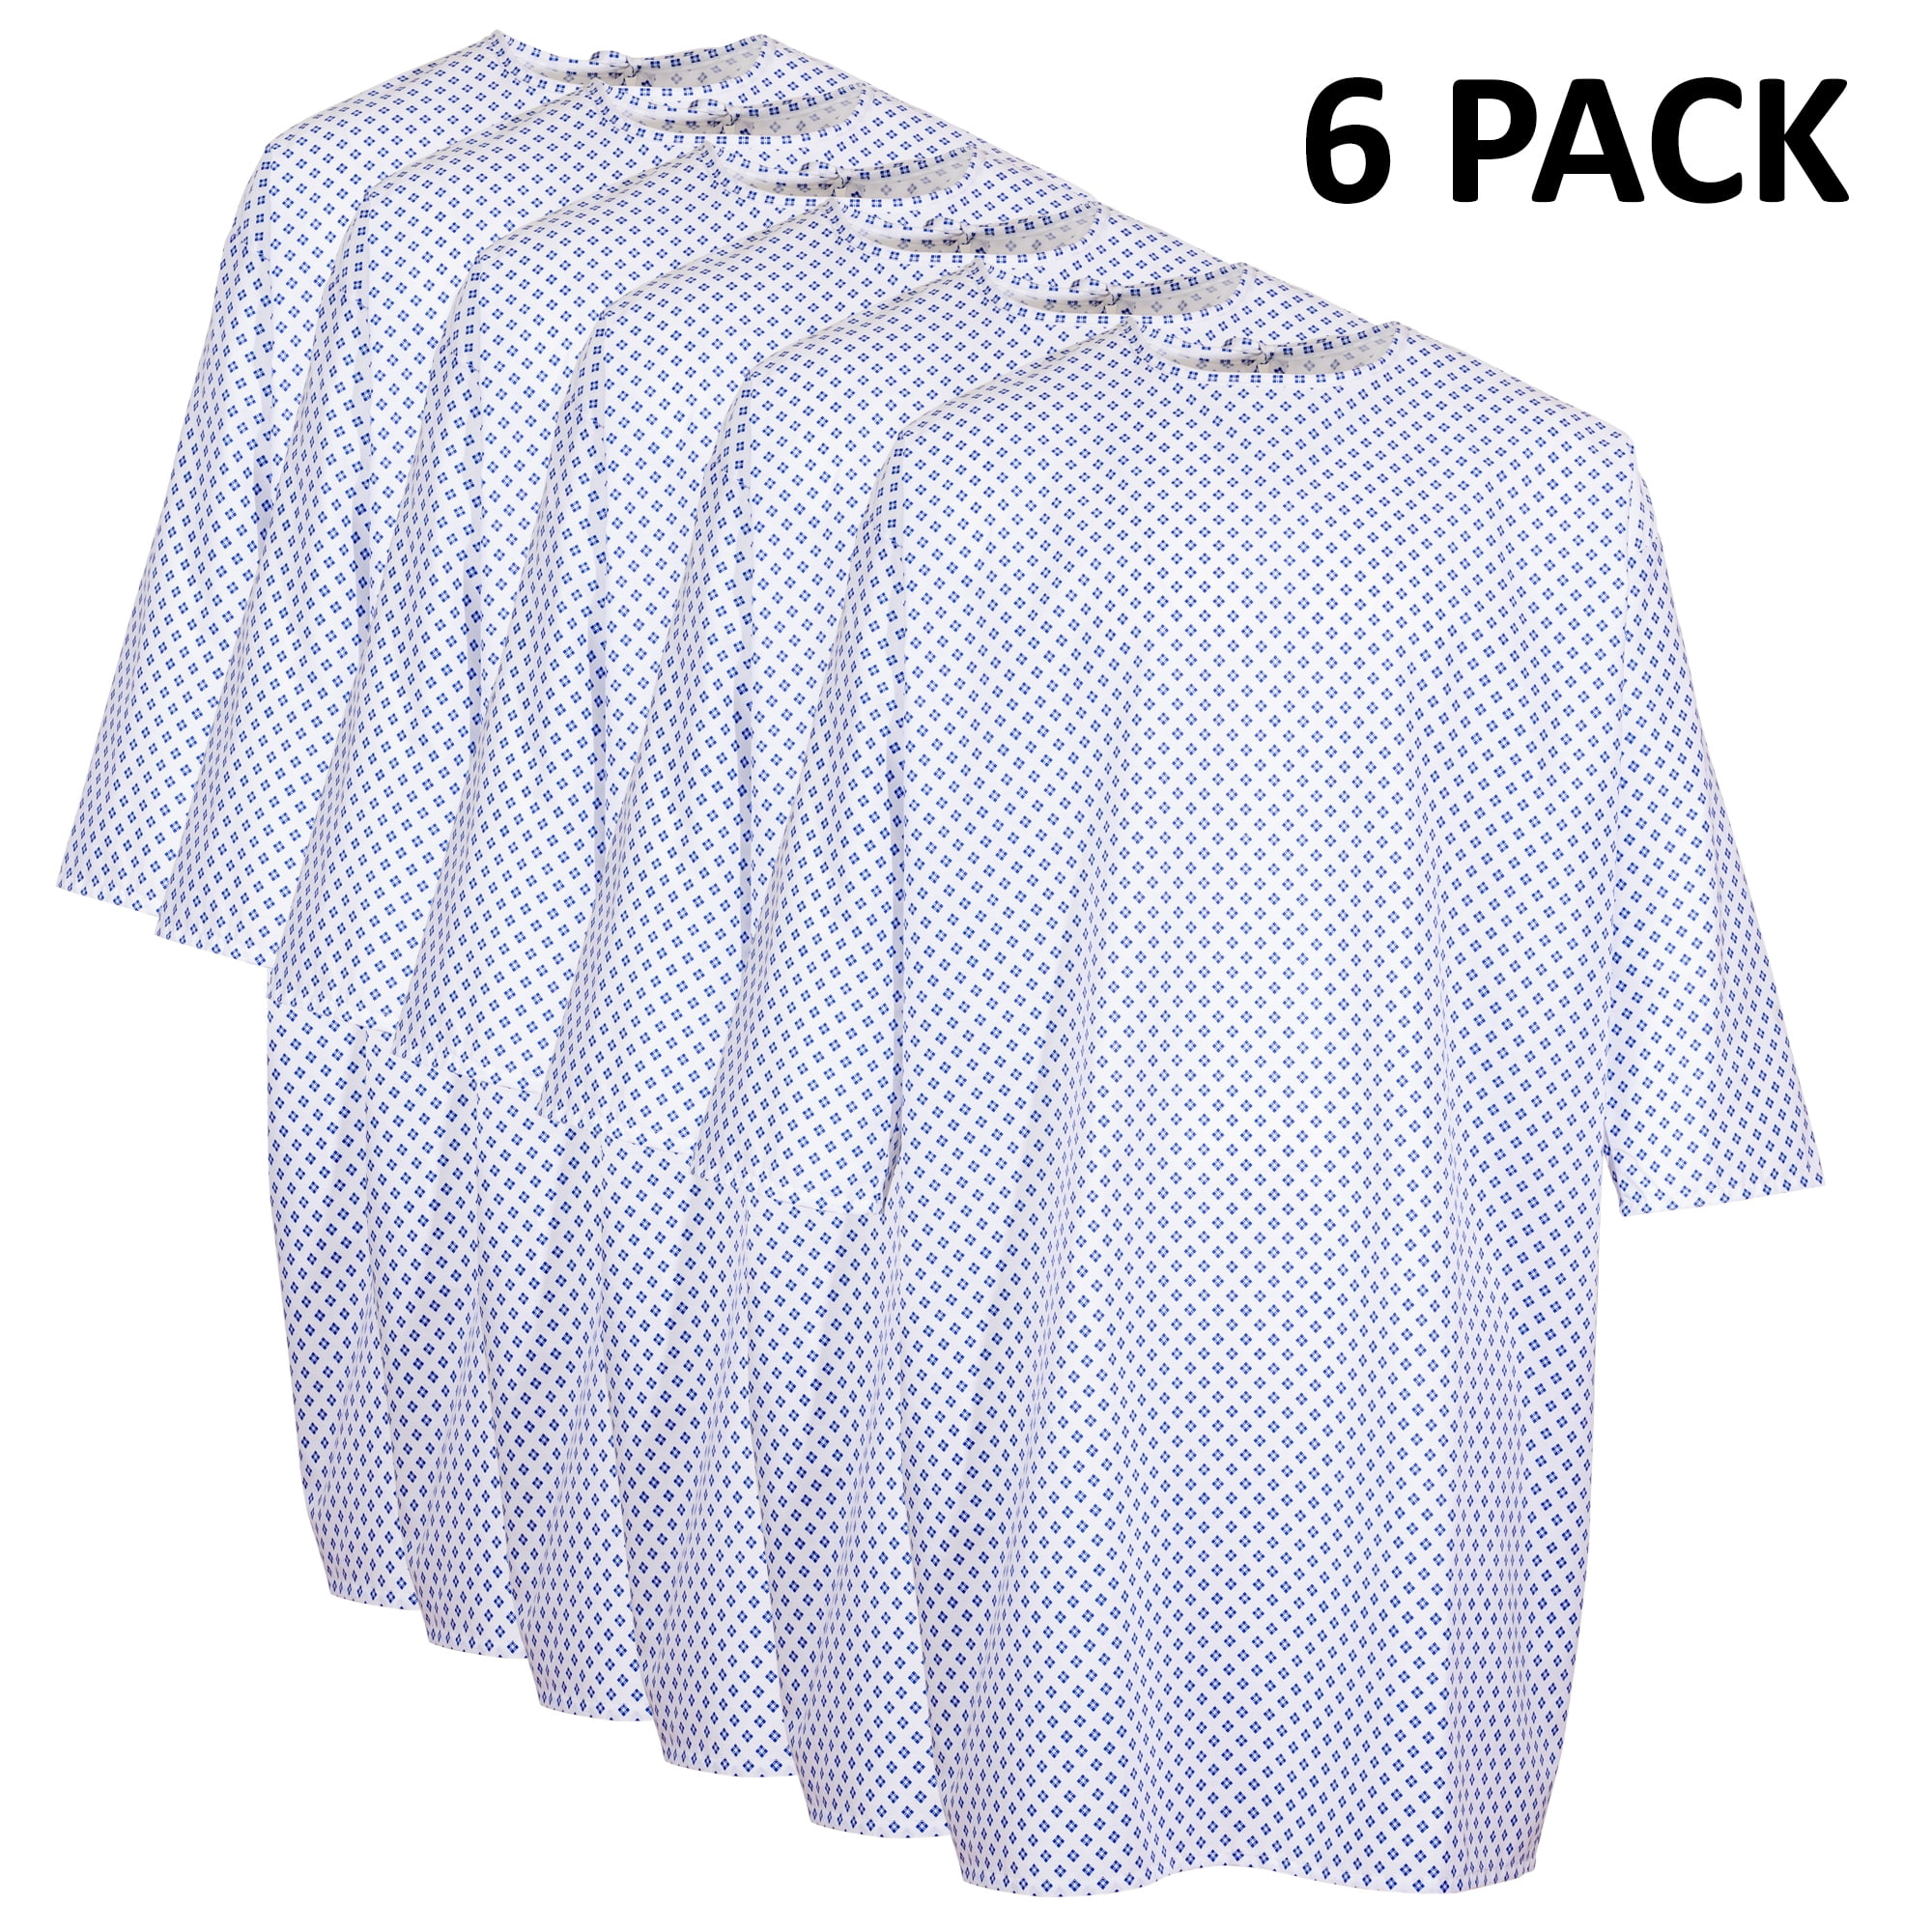 Medical IV Friendly Shirts and Hospital Robes Made with Snap Fasteners -  KAMsnaps®